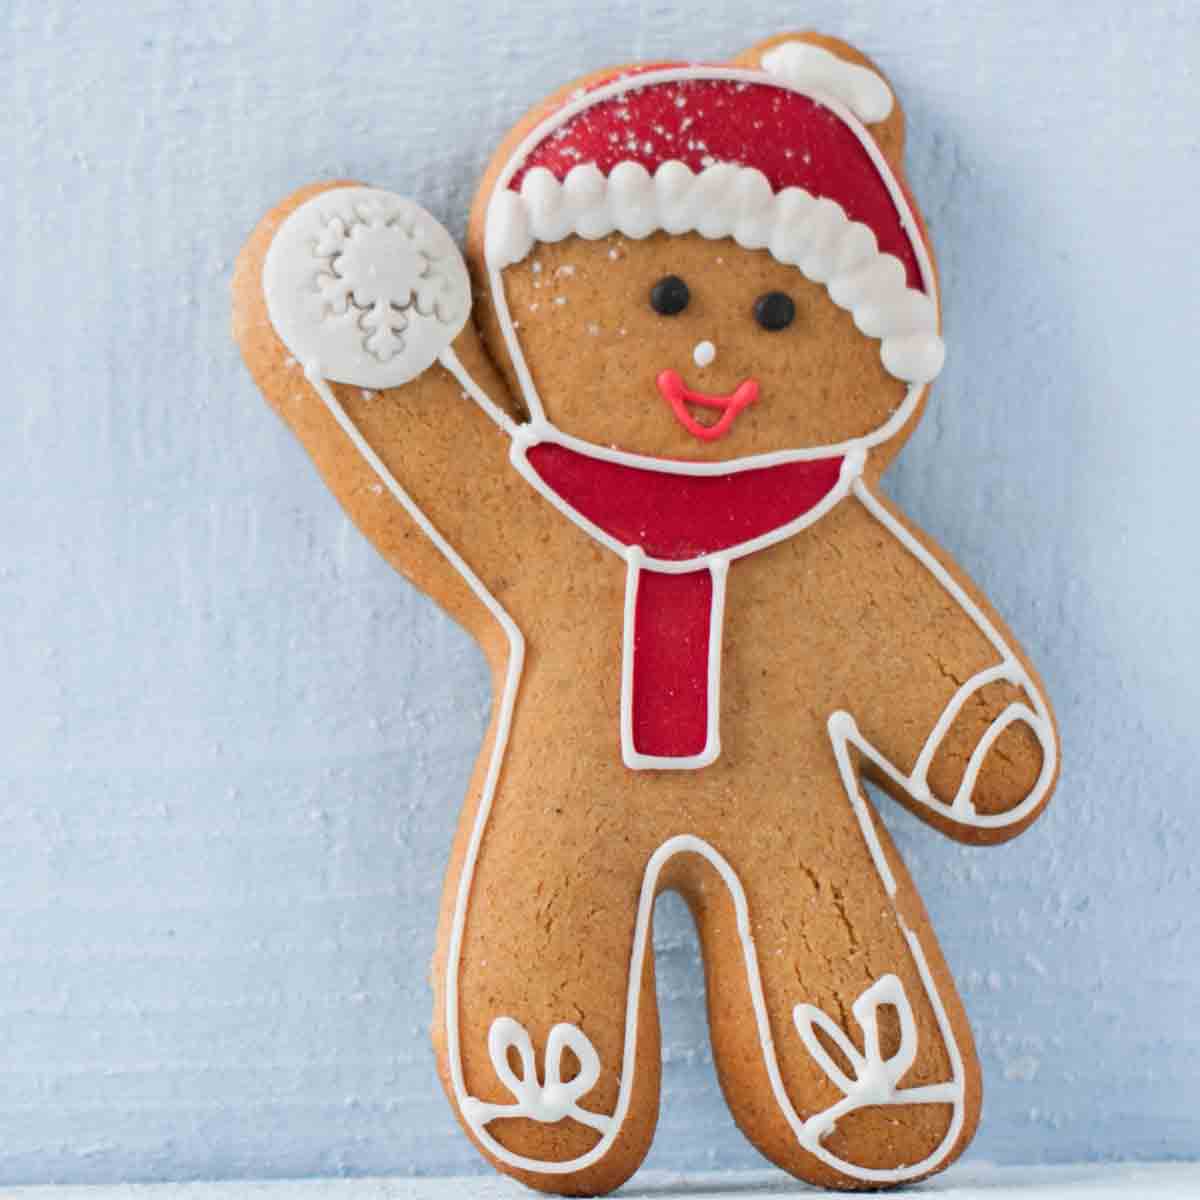 Gingerbread Man Cookie  One Of The Many Vegan Christmas Desserts To Buy